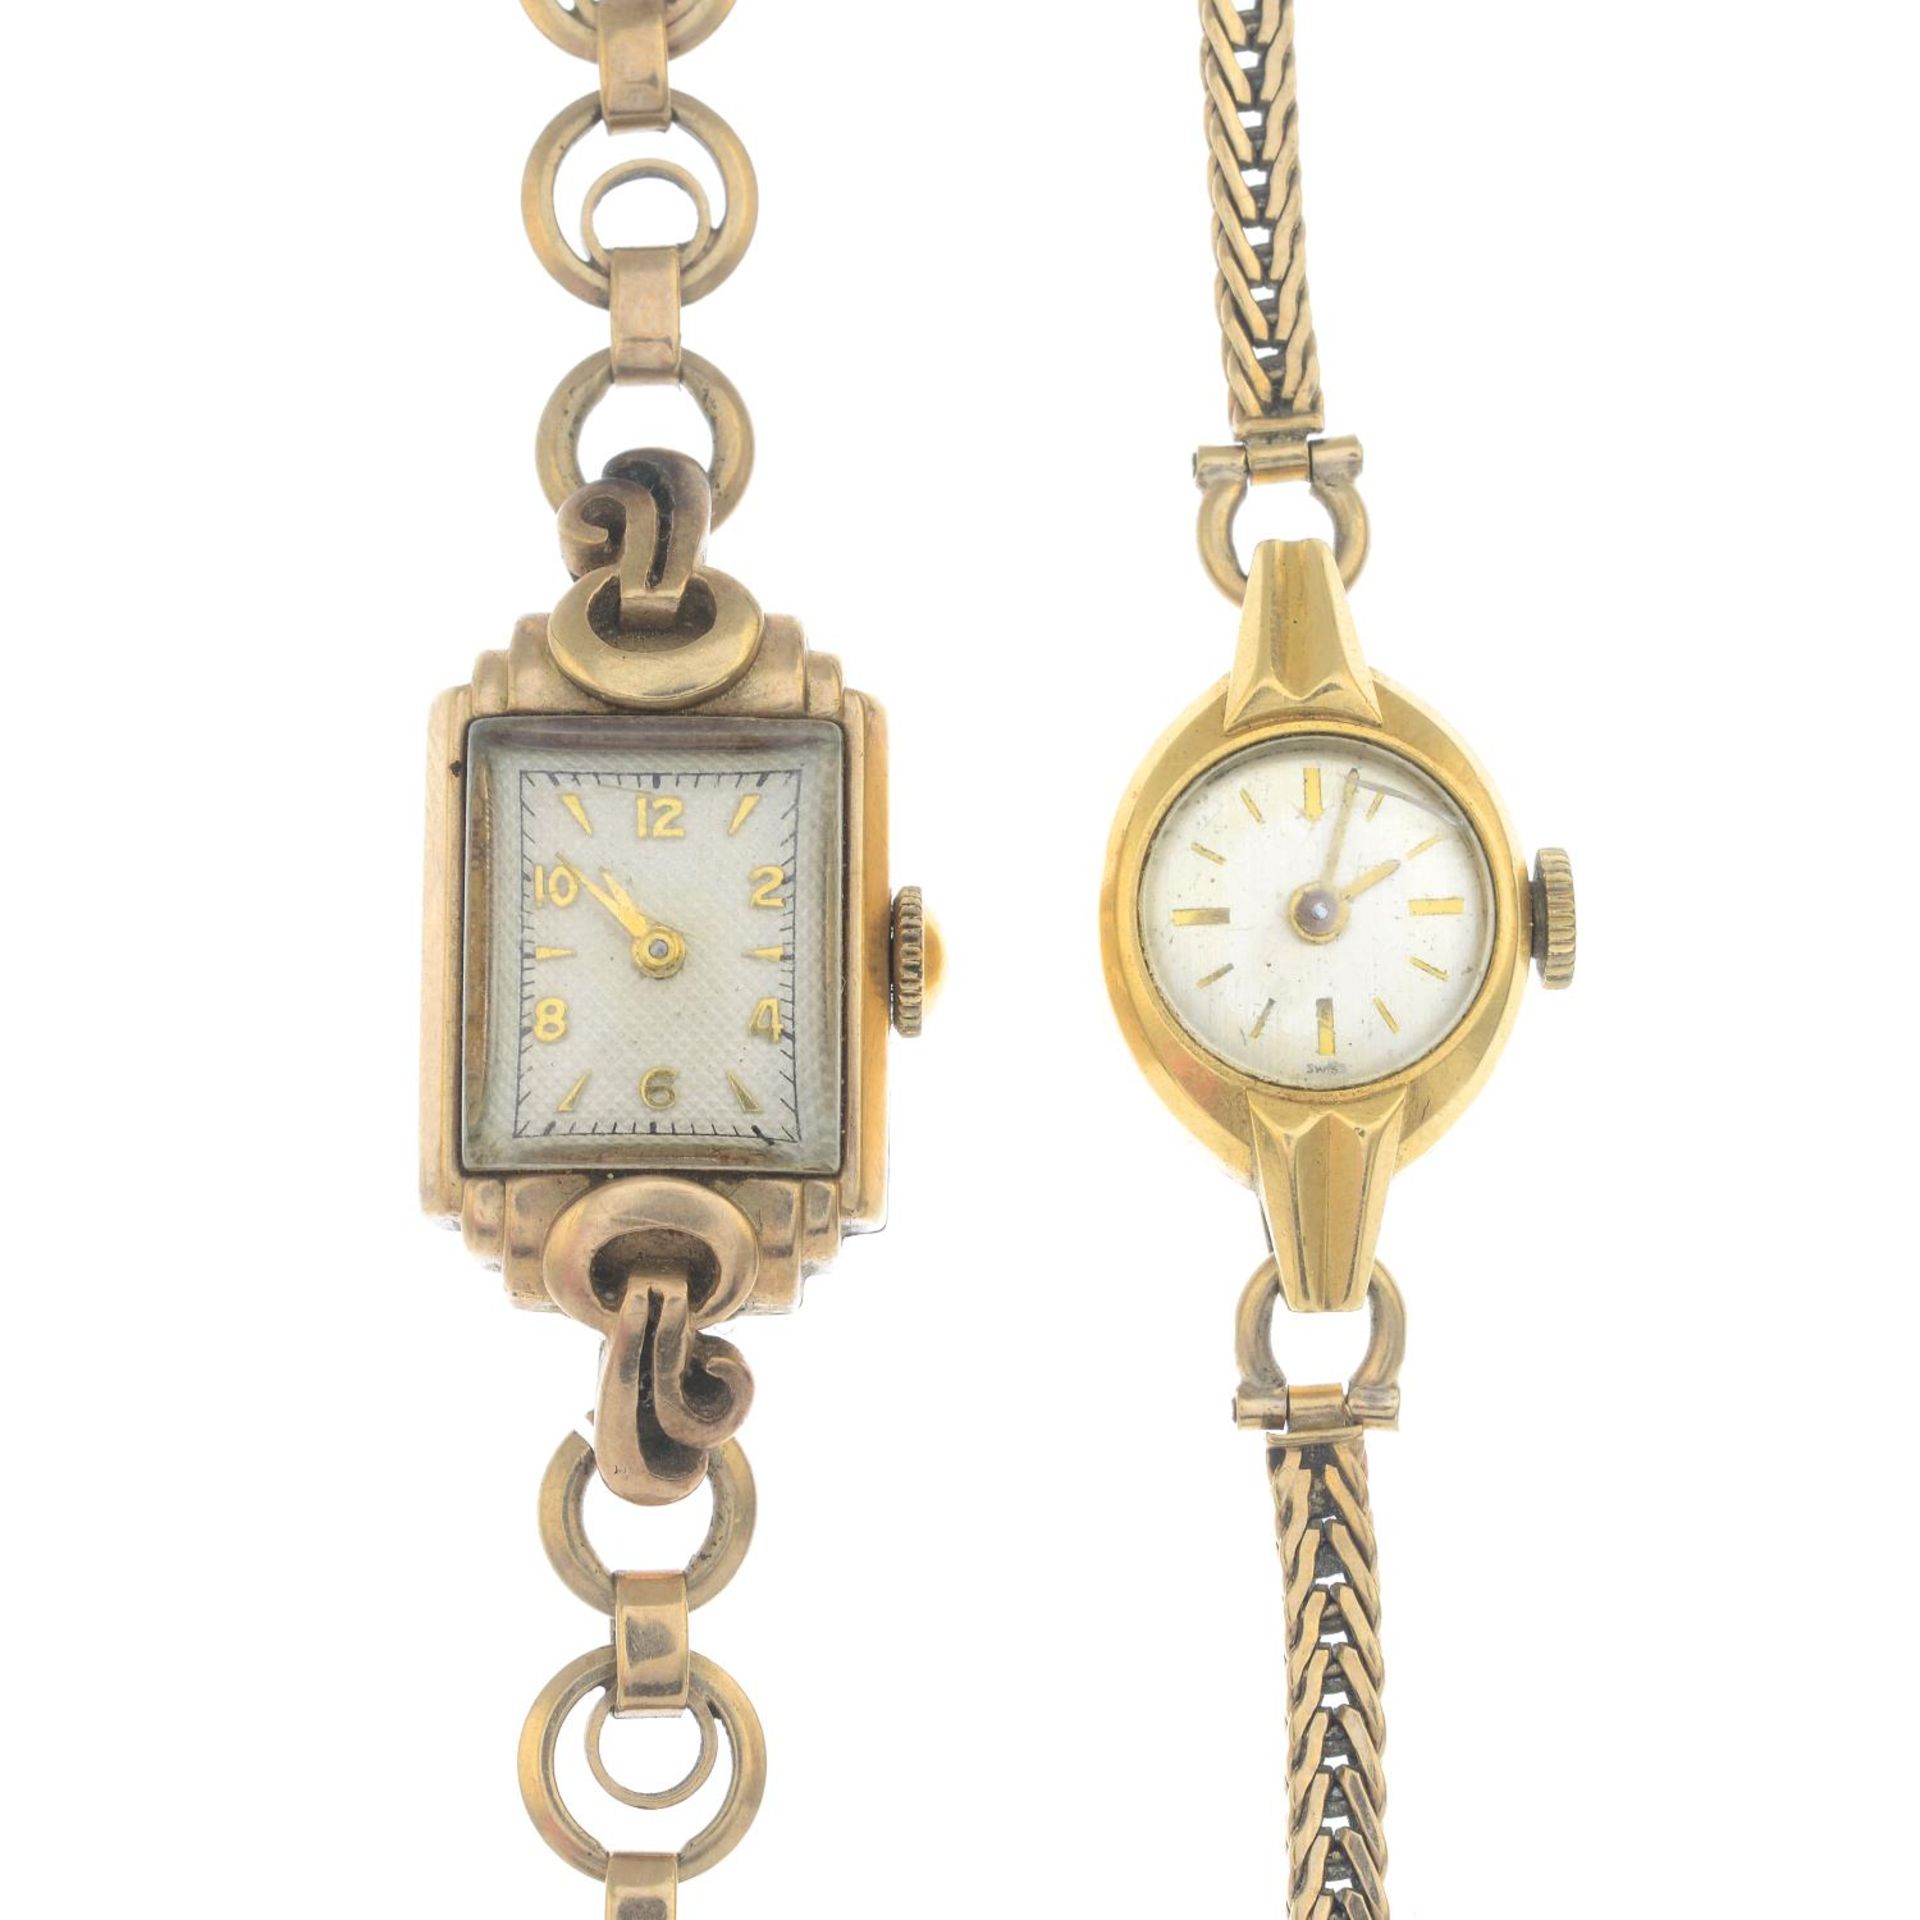 18ct gold watch head, with 9ct gold strap, hallmarks for London, 1964, length 15cms, 11.2gms.